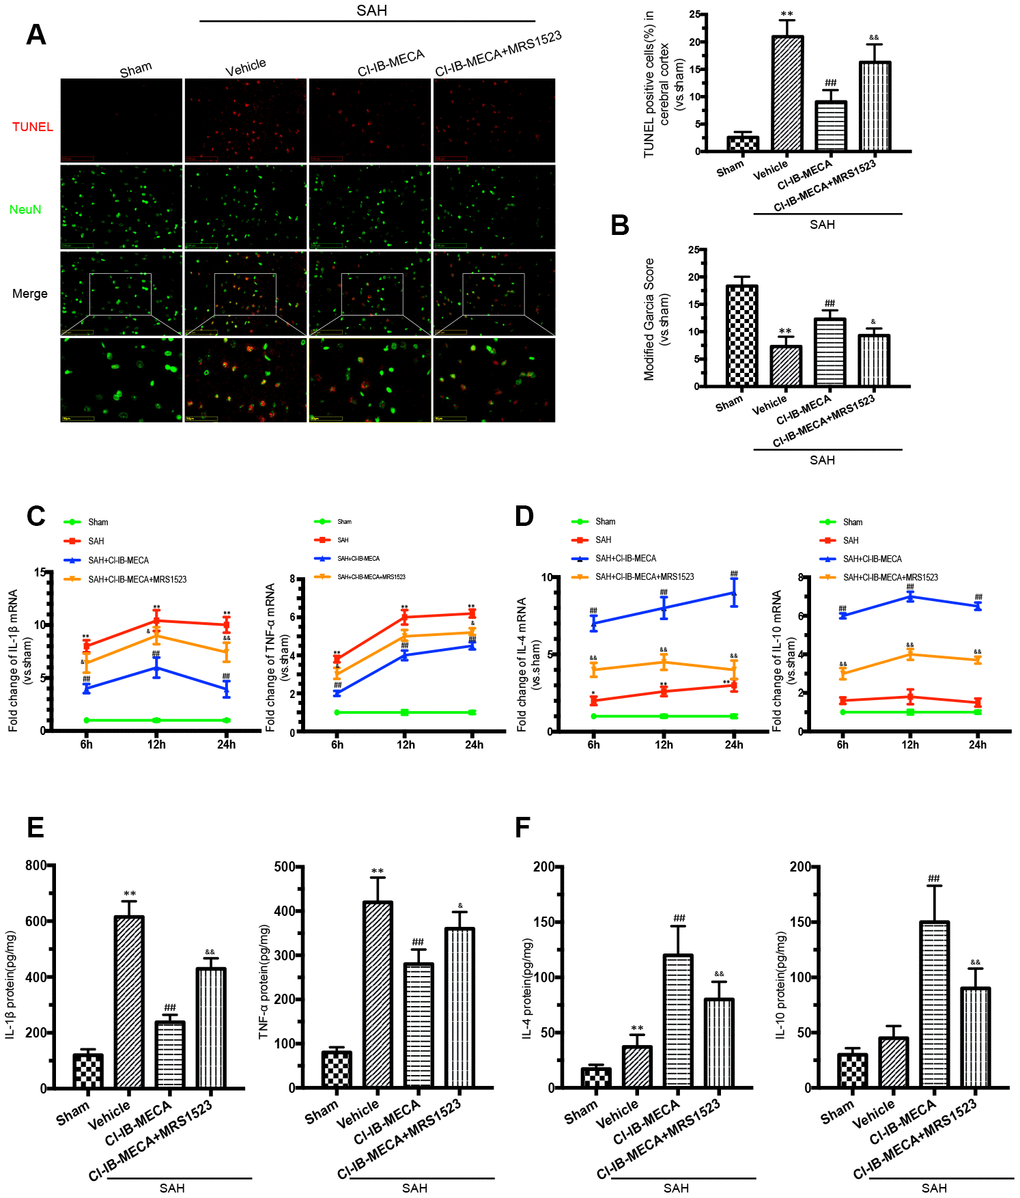 The A3R agonist ameliorated neuronal apoptosis and improved neurobehavioral outcomes by regulating neuroinflammatory after SAH. (A) Apoptotic neurons and percentage of TUNEL-positive cells in the cerebral cortex 24 h after SAH. NeuN was used as a neuron marker. (B) Neurologic score was performed 24 h after SAH. (C, D) The changes of IL-1β, TNF-α, IL-4 and IL-10 mRNA at 6 h, 12 h and 24 h after SAH. (E, F) The inflammatory cytokines was measured by enzyme-linked immunosorbent assay at 24 h after SAH. n=5 in each group. Values are shown as the mean ± SD. *p p p p p 